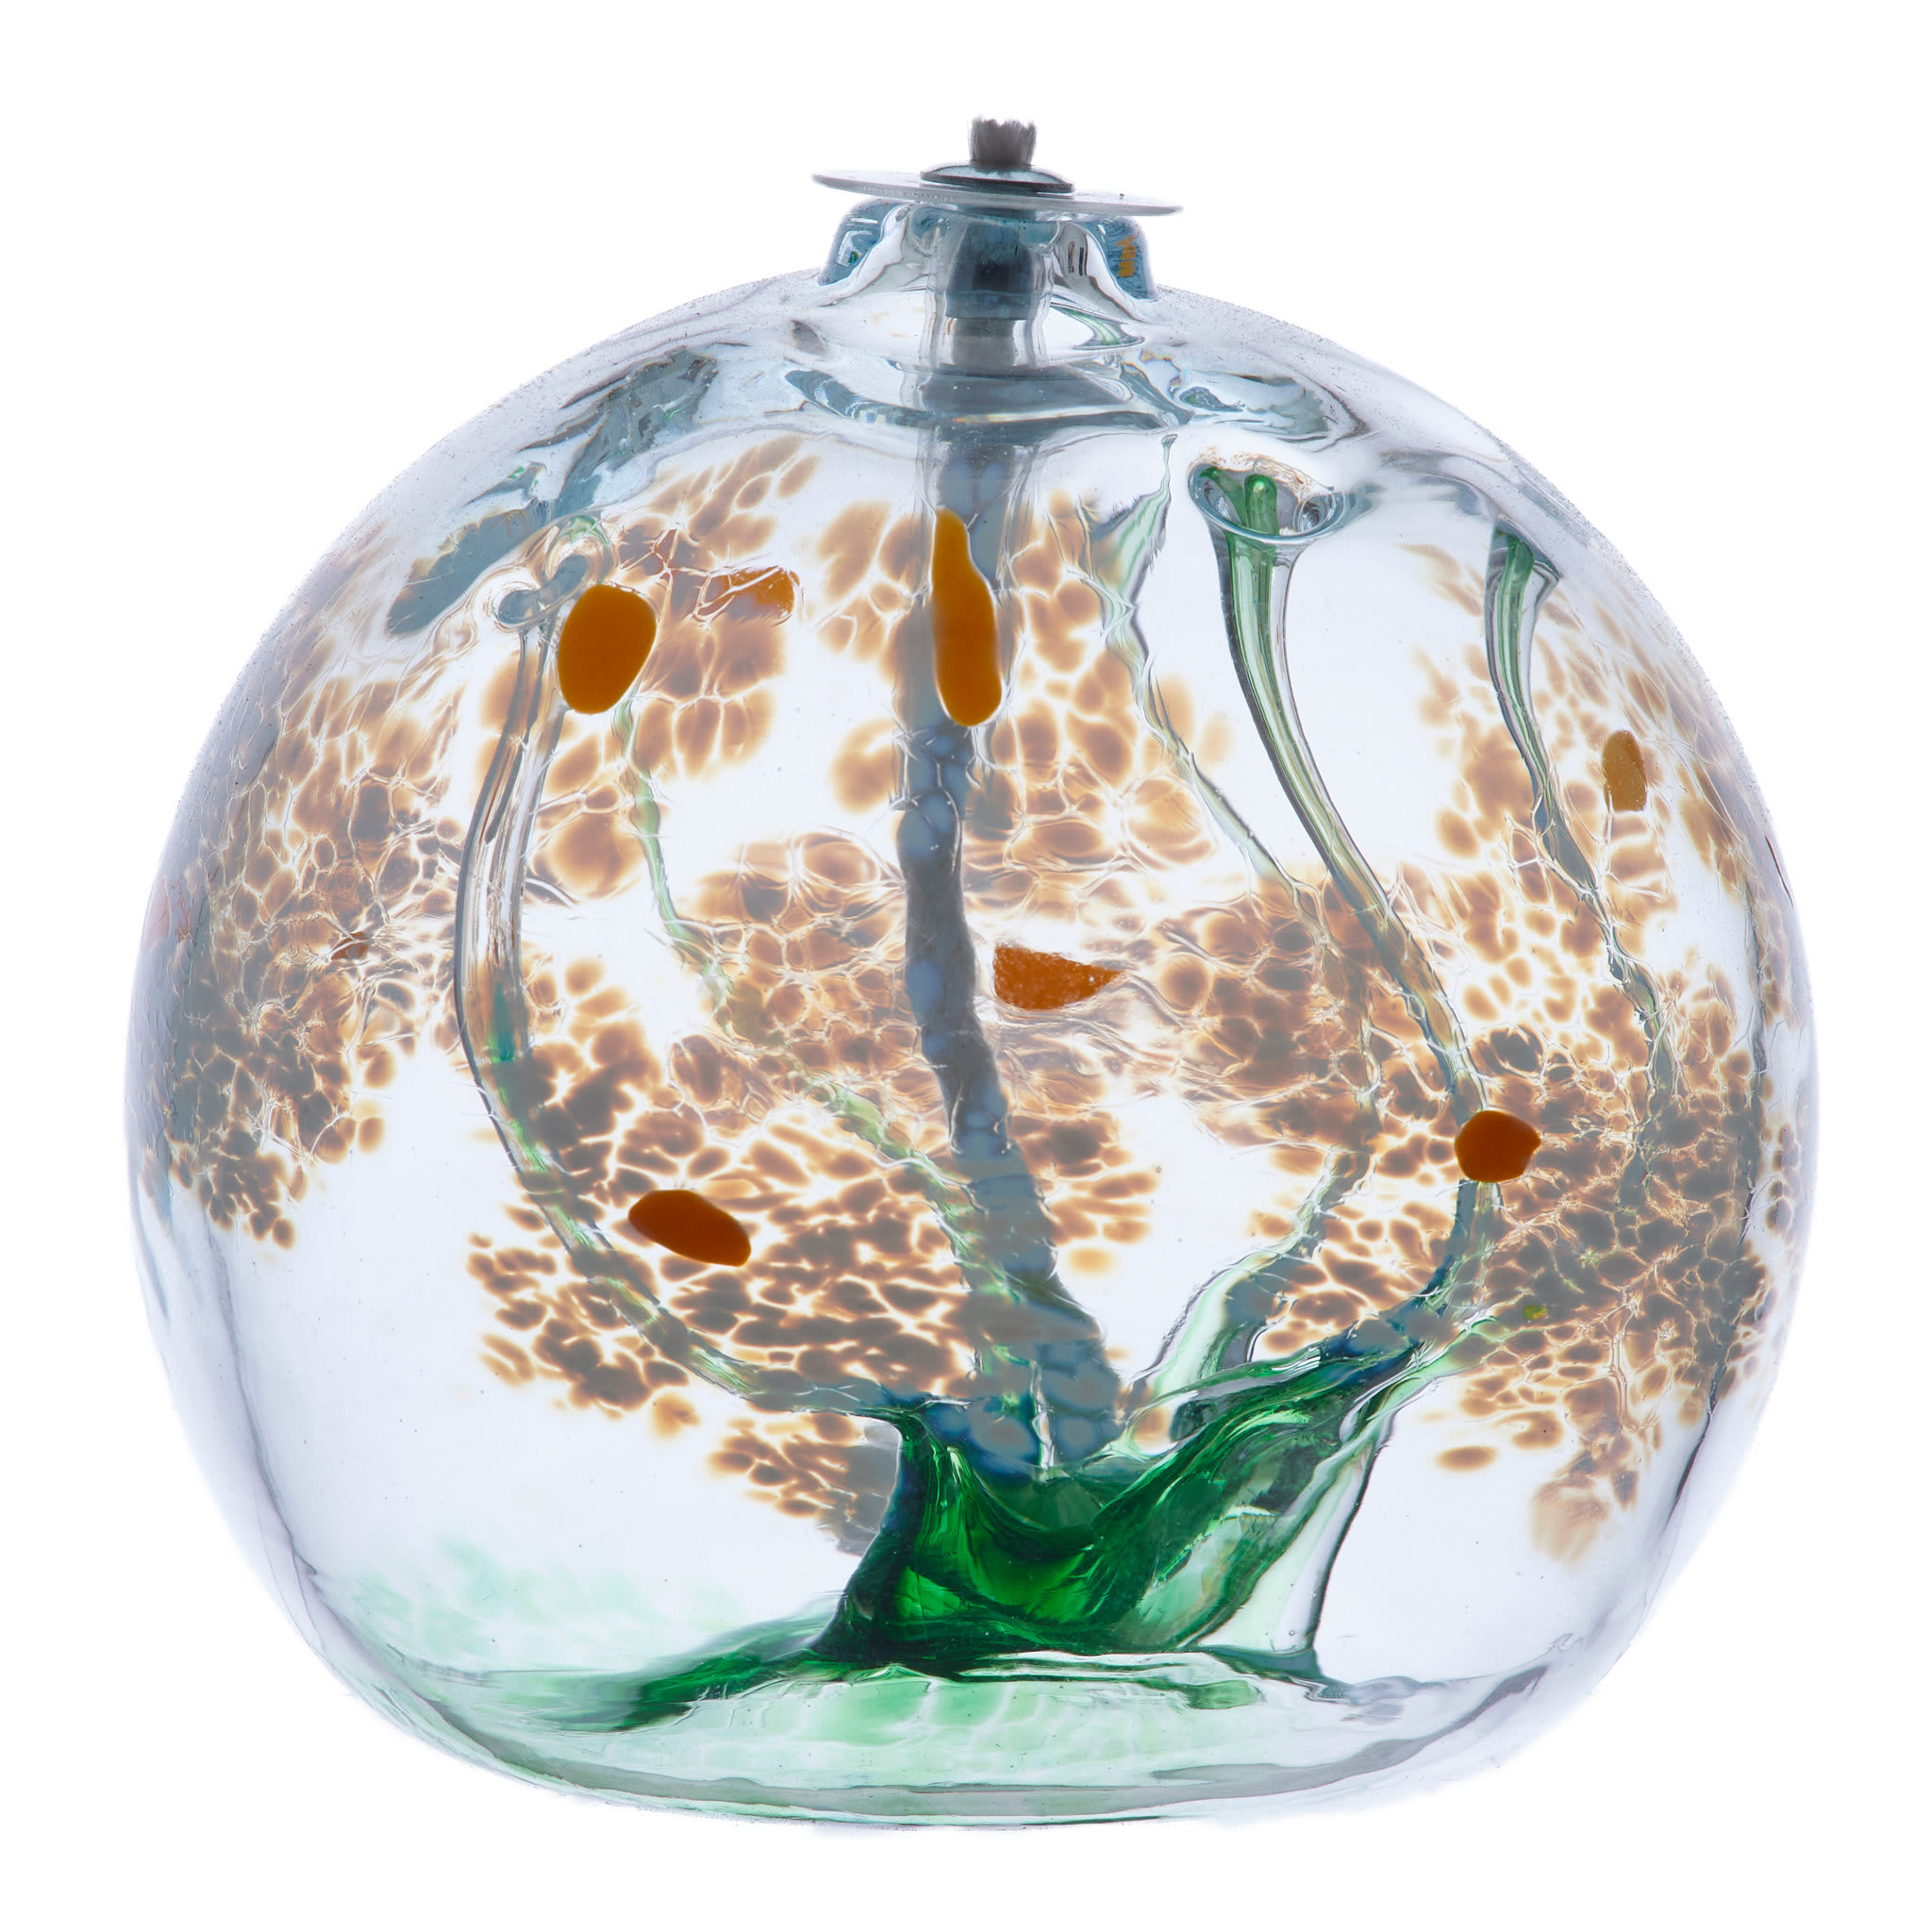 Friendship (Blossom Oil Lamp) - Kitras Art Glass - Flowers are used to celebrate life's special moments. Flowers are given to commemorate friendship, appreciation, romance, and sometimes just because! Celebrate these moments with a flower that never stops blooming!   Contains one 3'' handblown glass oil lamp and one 14.4 oz. bottle of parrafin oil to burn. Limited quantities available.  Card reads: Your friendship adds blossoms to my garden of life, may it continue to grow.